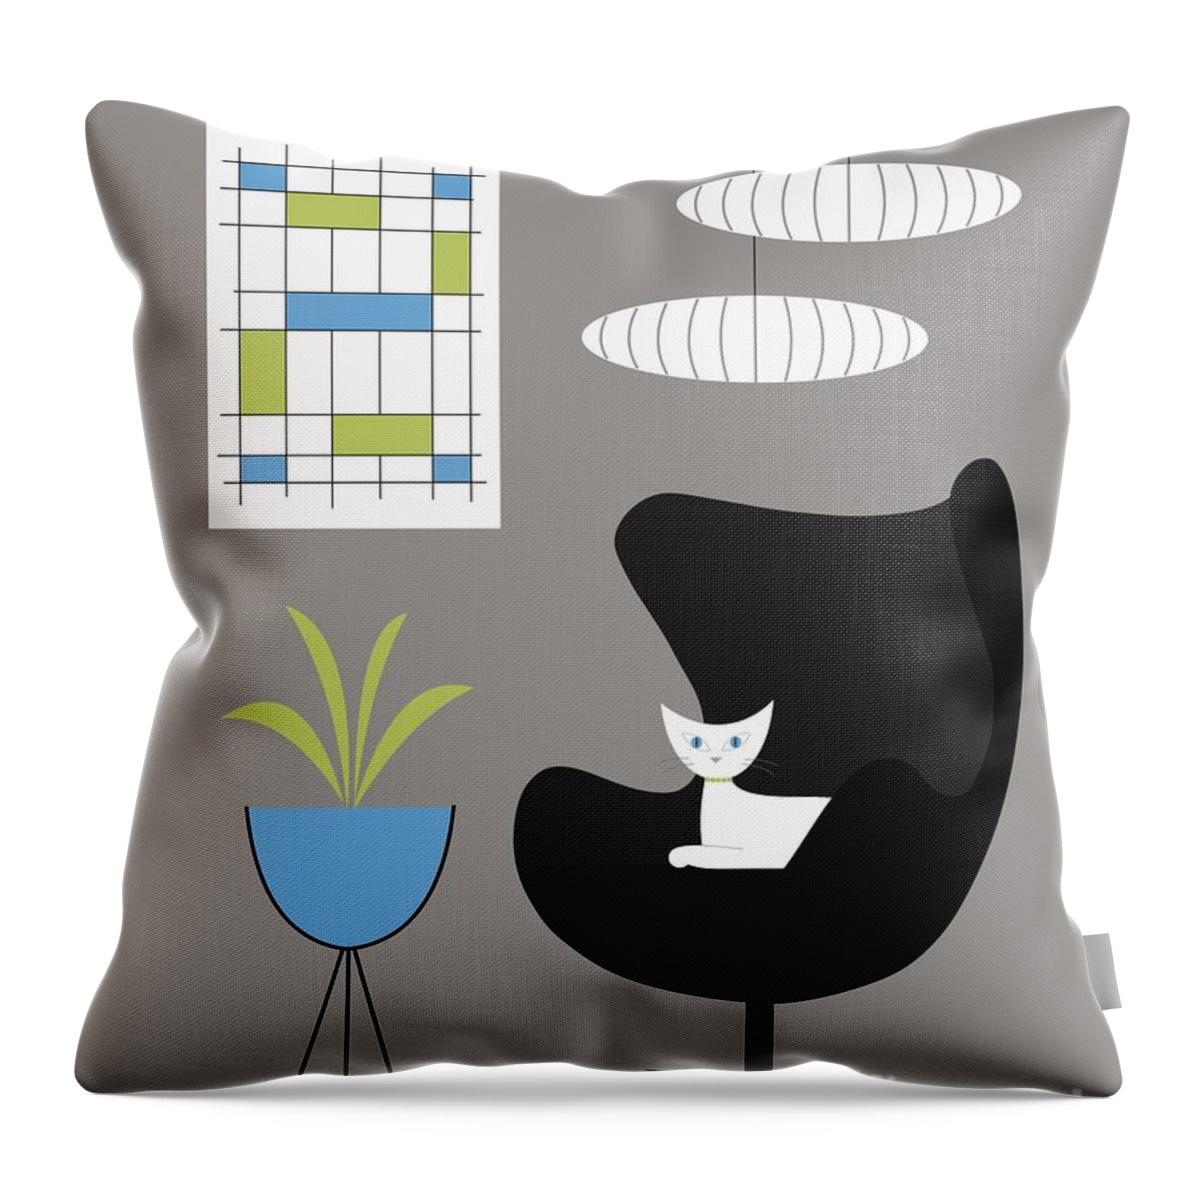 Egg Chair Throw Pillow featuring the digital art Black Egg Chair by Donna Mibus